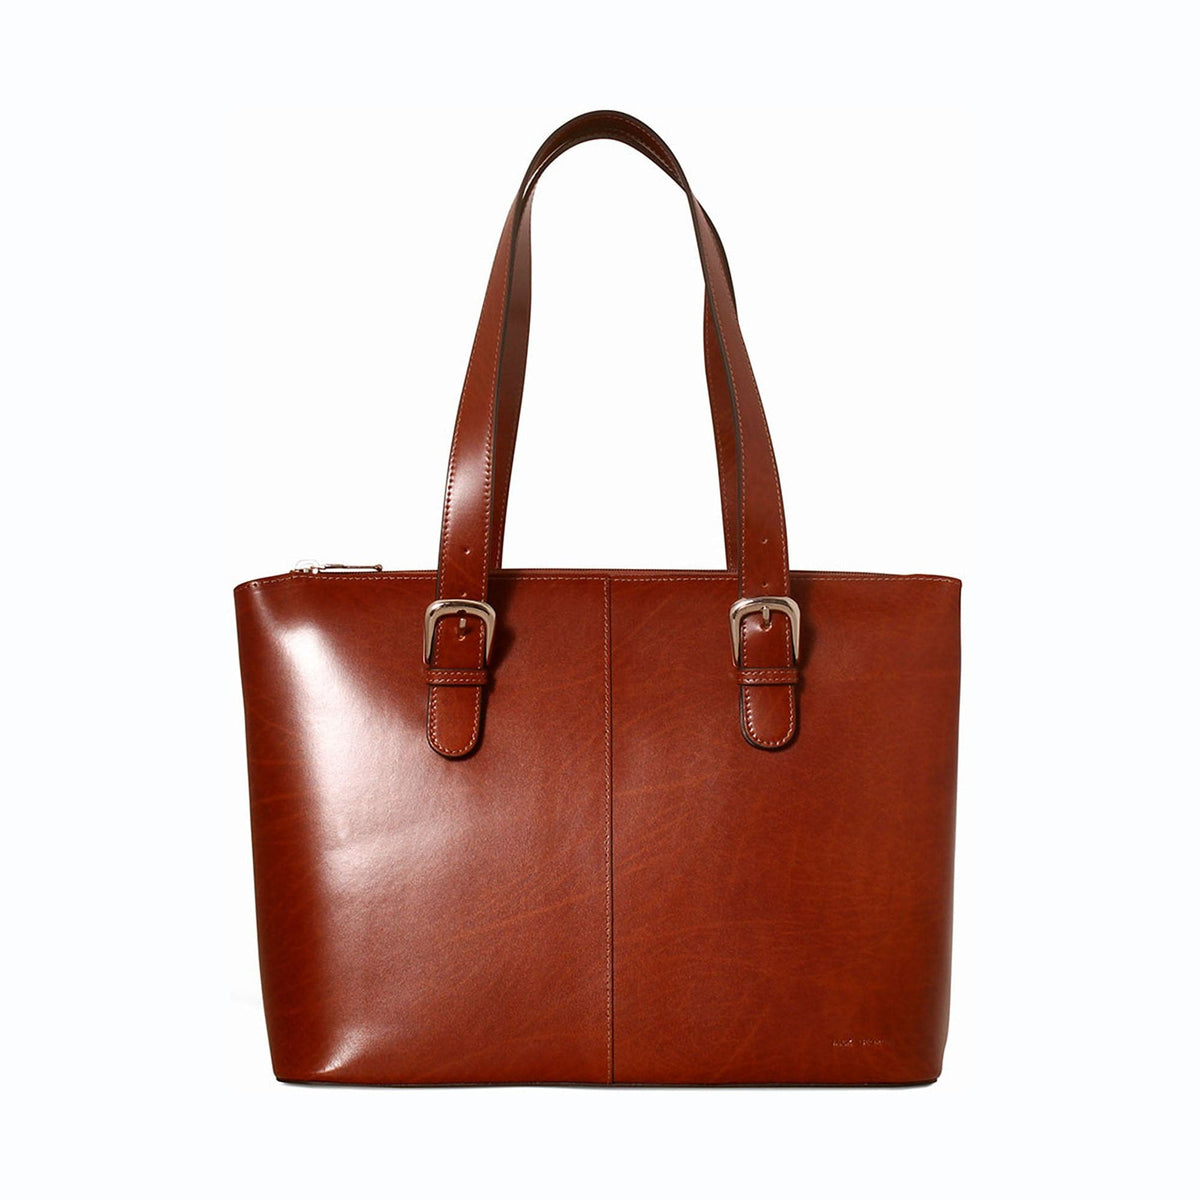 Jack Georges Milano Madison Avenue Business Tote Bag